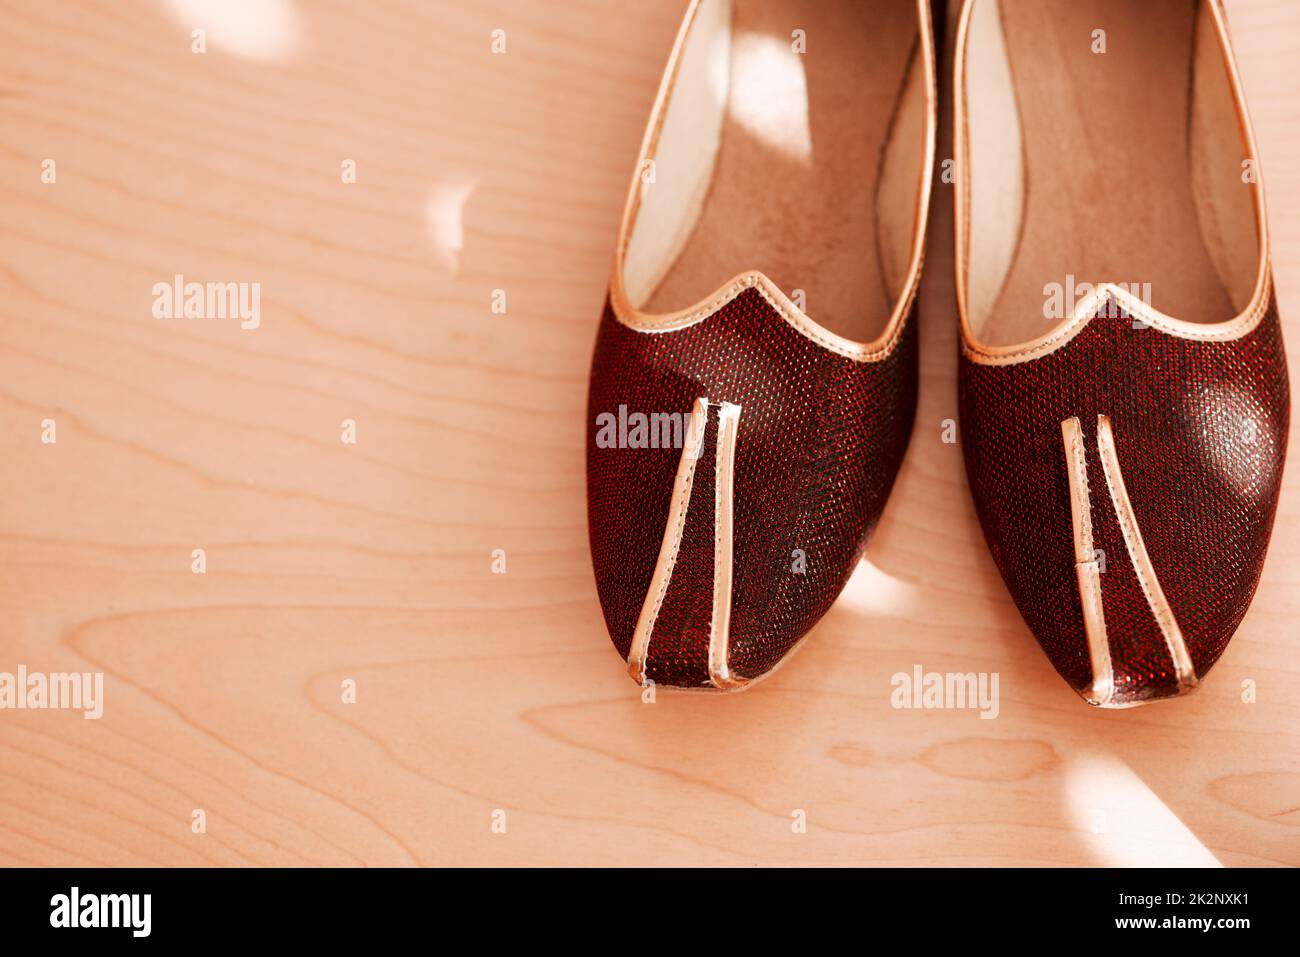 Style paired perfectly with culture. Shot of two formal mens shoes on the floor of a bedroom. Stock Photo